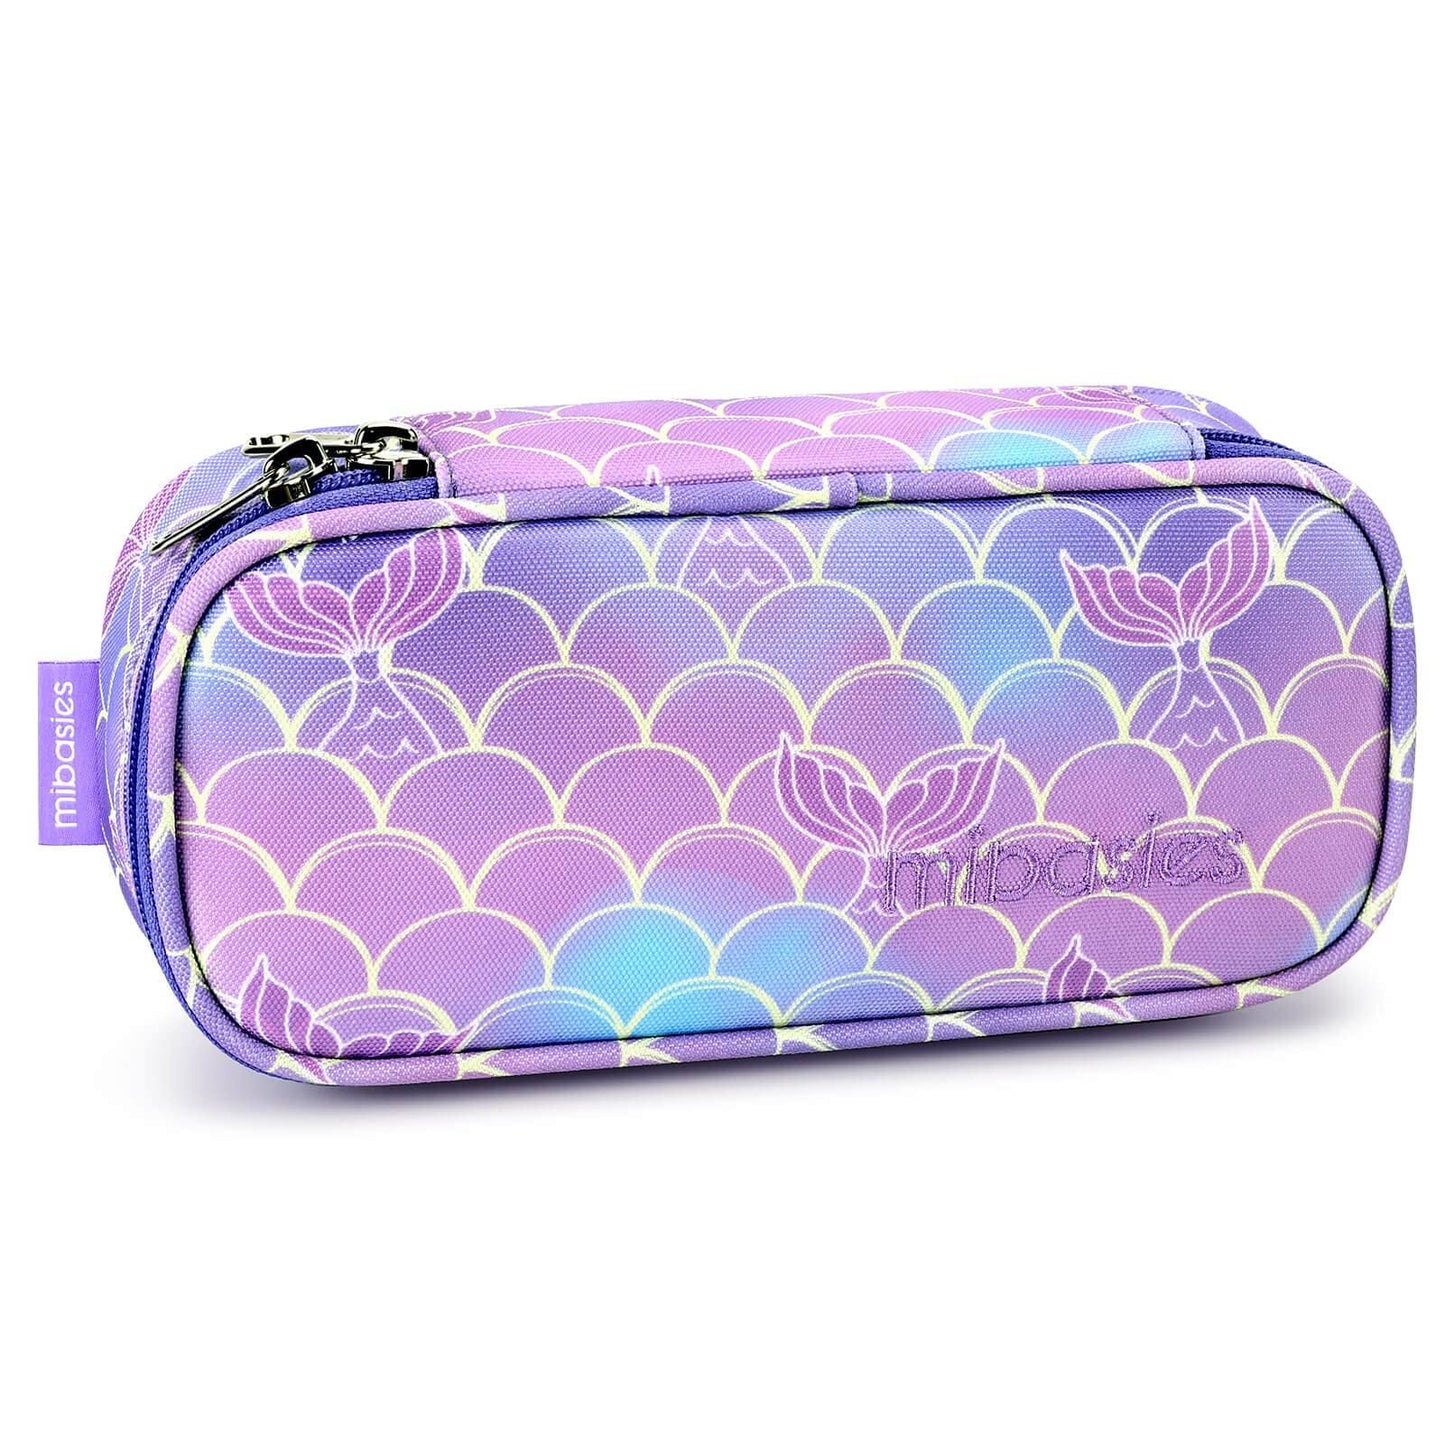 FUN FOR SPRING Pencil Pouch Mibasies Mermaid Tail 